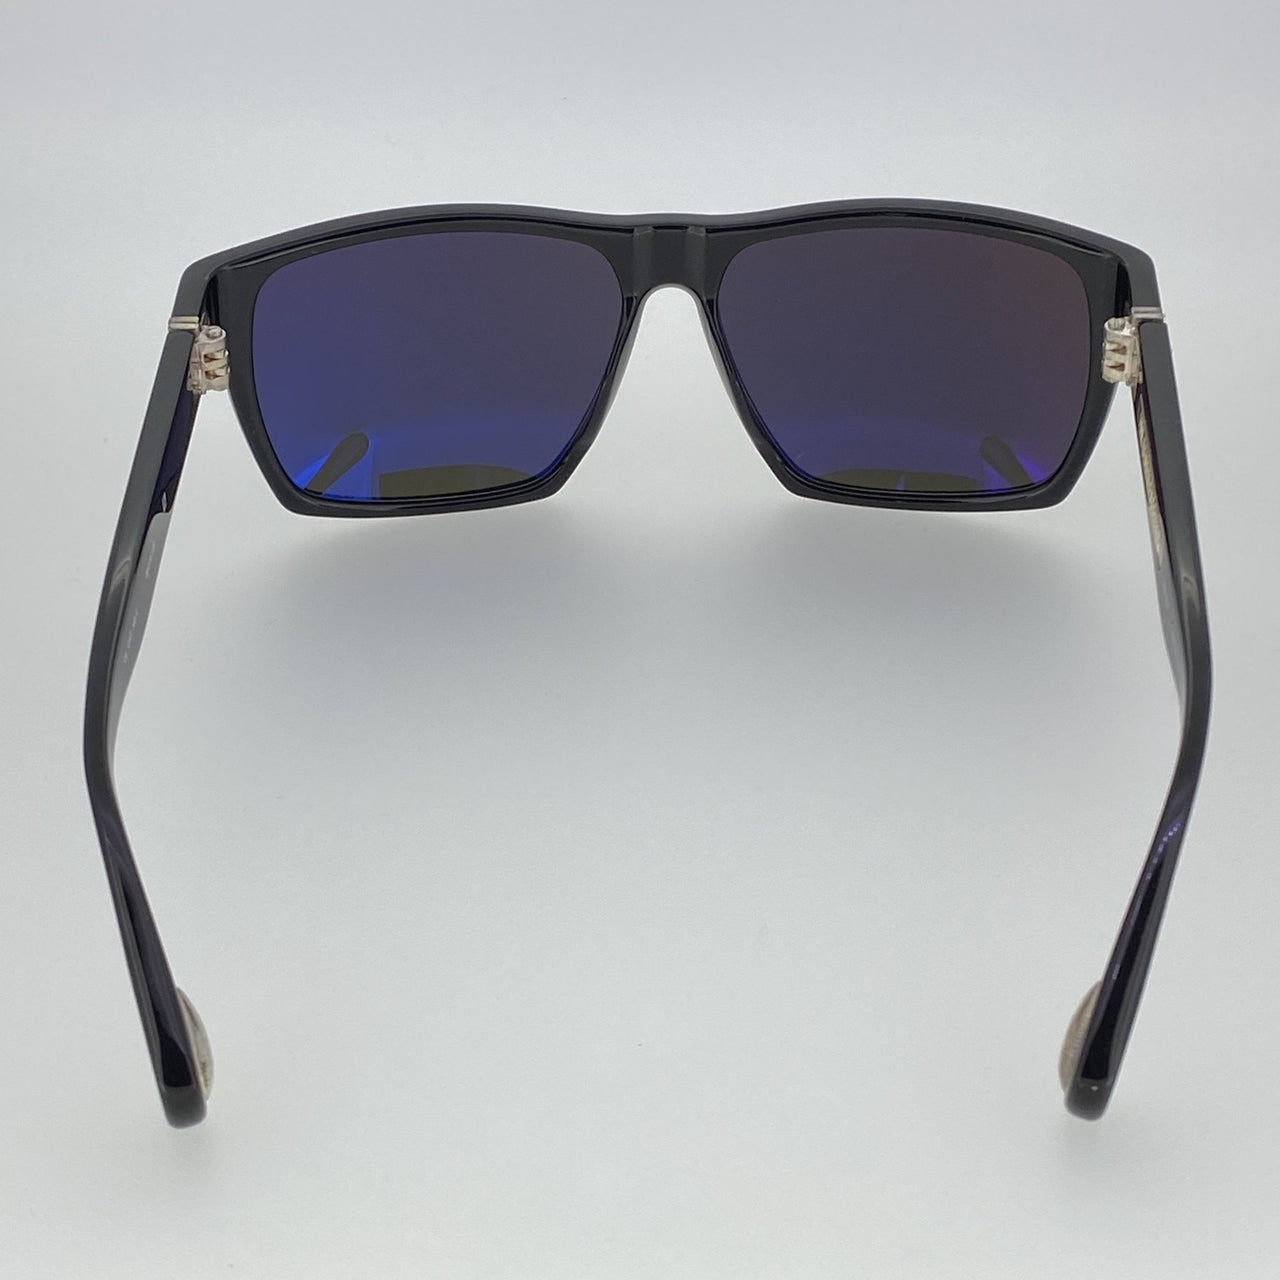 Ann Demeulemeester Sunglasses Angular Black 925 Silver with Grey Lenses Category 3 Dark Tint AD37C1SUN - Watches & Crystals